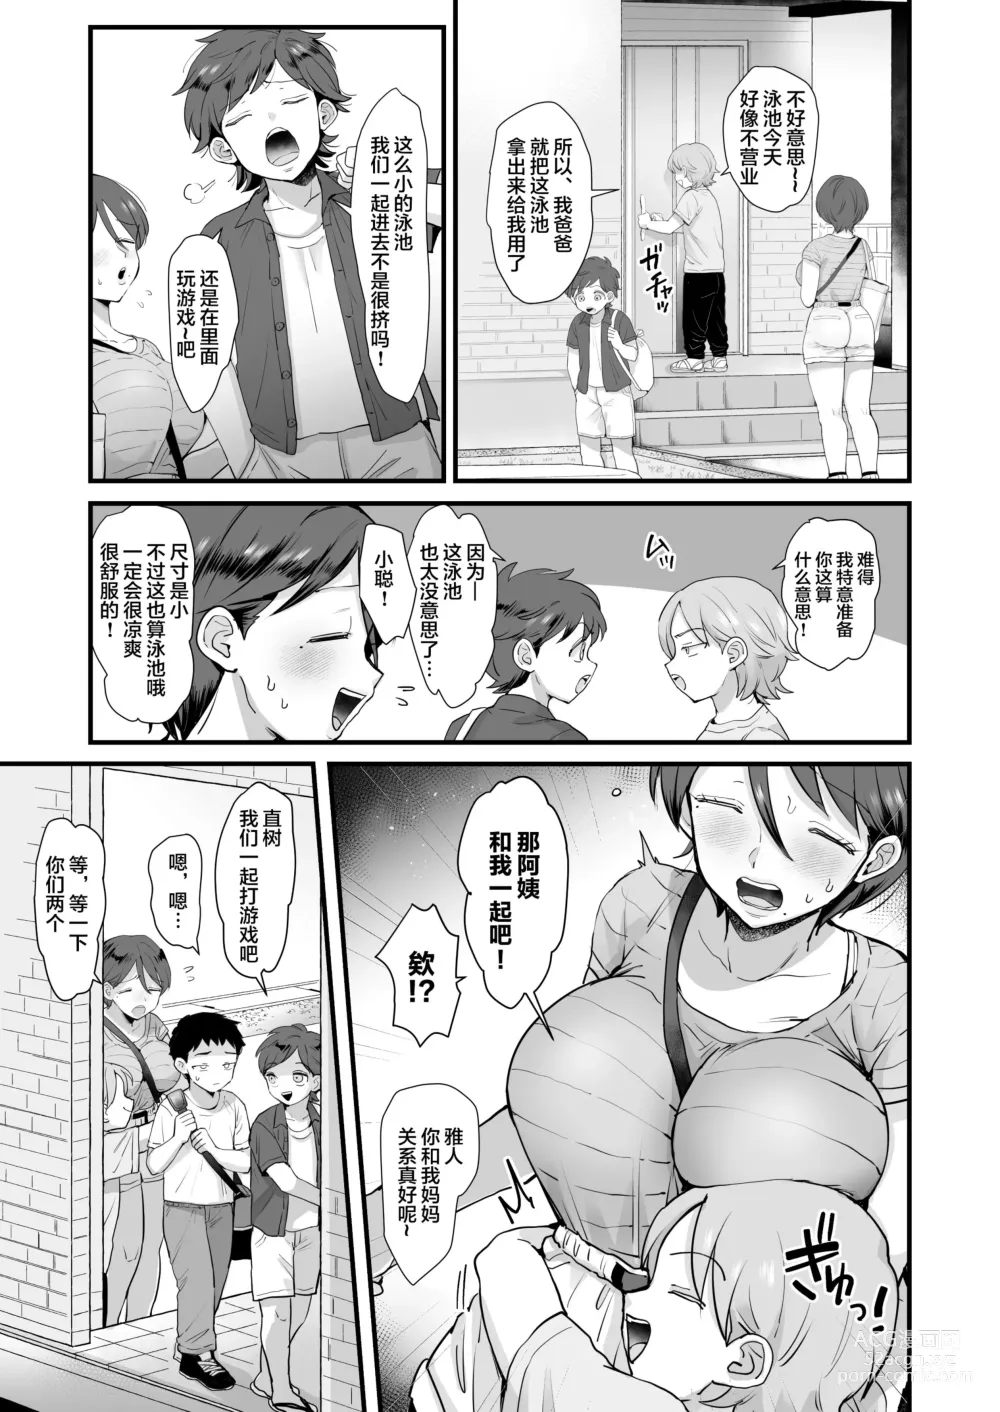 Page 10 of doujinshi sinistra (Eda)] Continued: A laid-back big-breasted mom. [Chinese translation